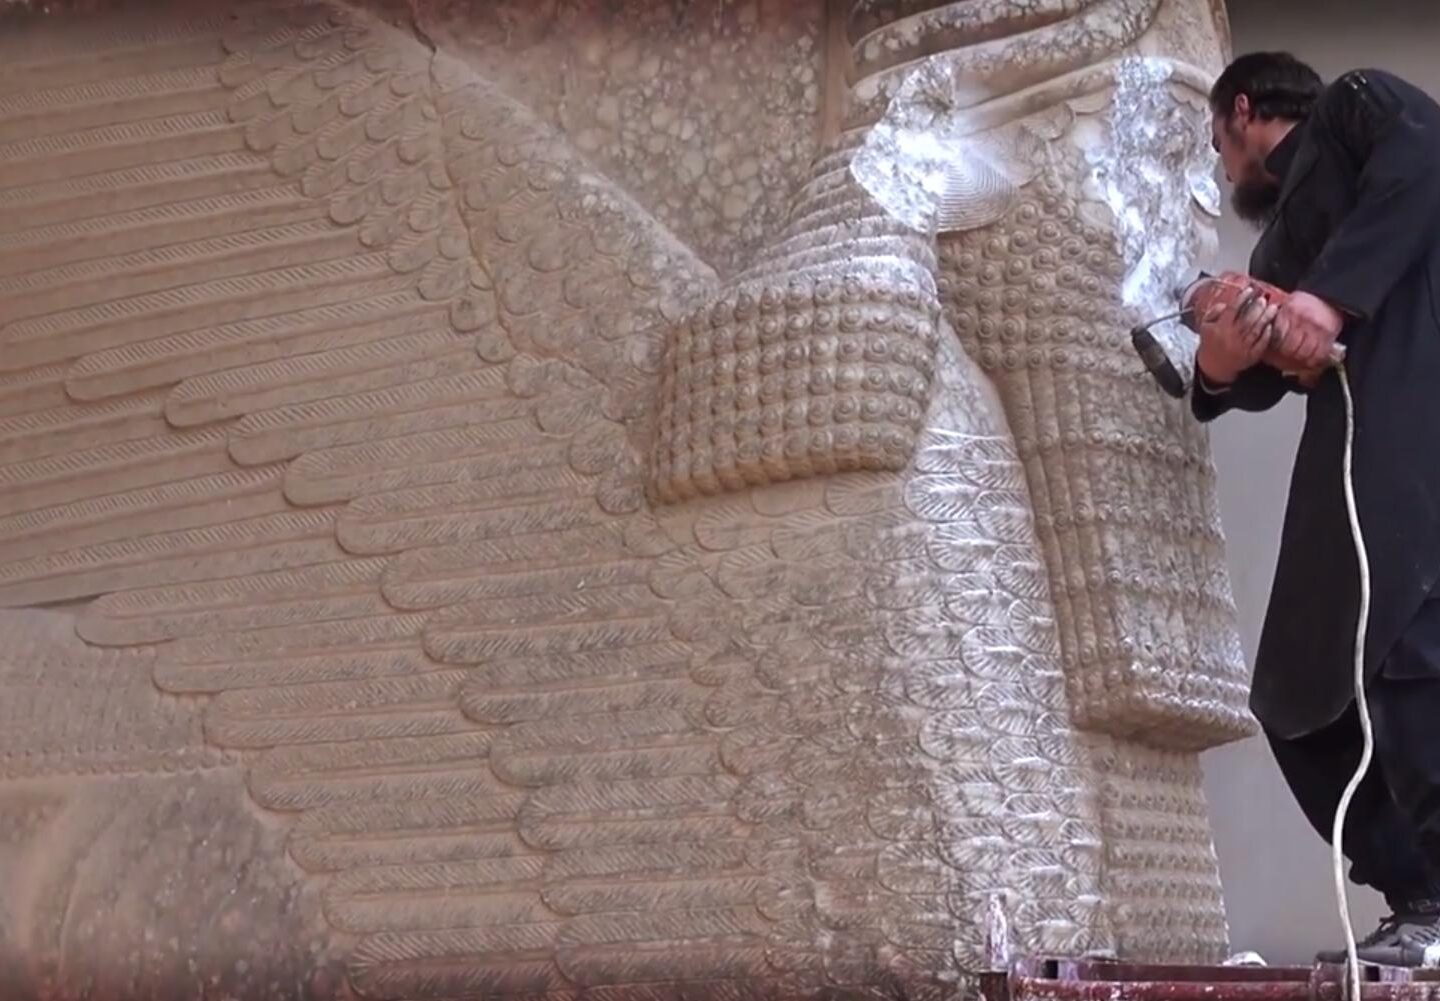 The Struggle of ISIS against the Cultural Heritage of the Middle East